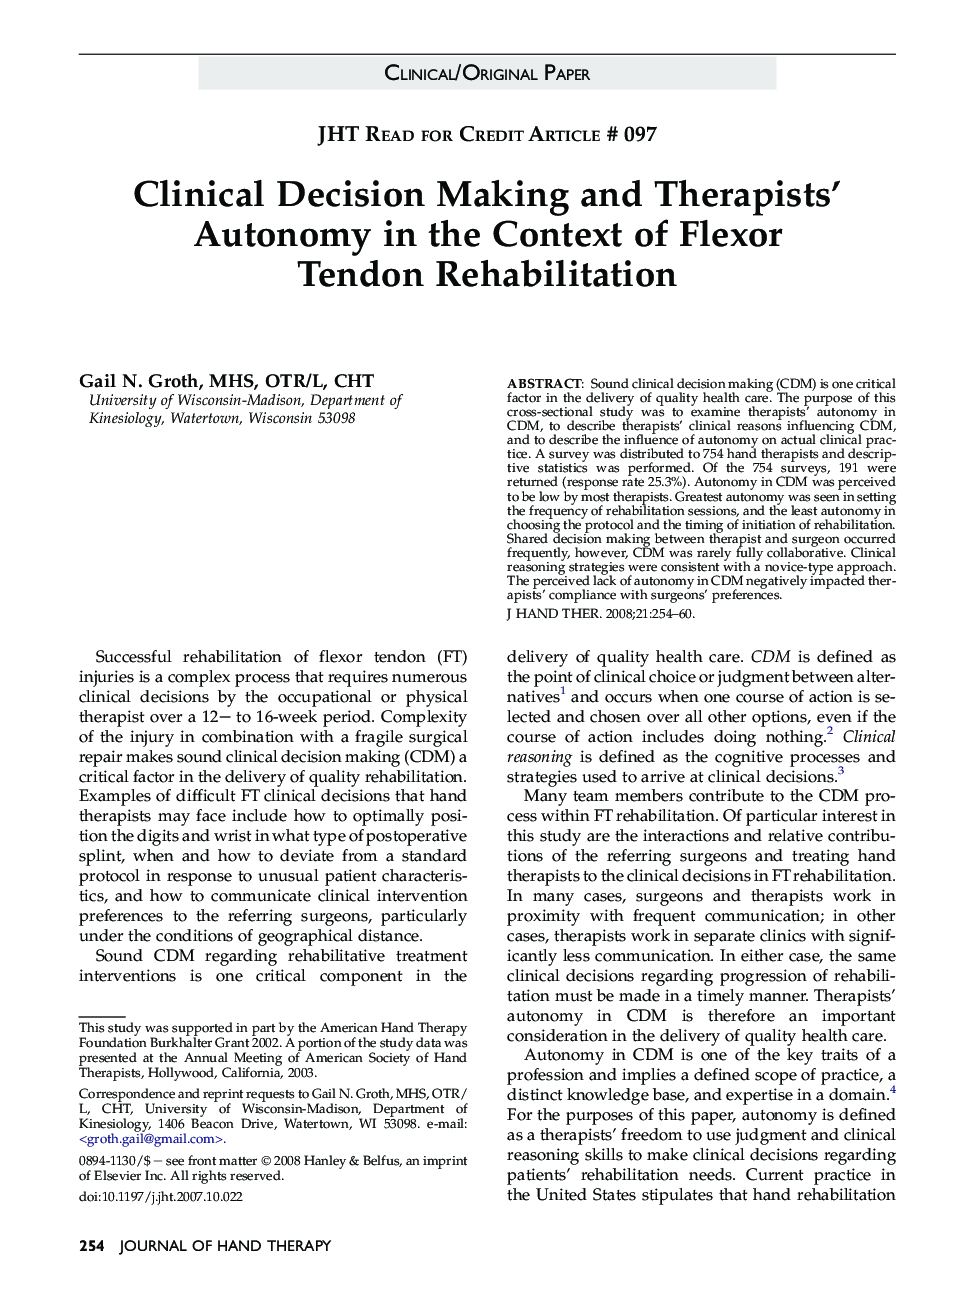 Clinical Decision Making and Therapists' Autonomy in the Context of Flexor Tendon Rehabilitation 